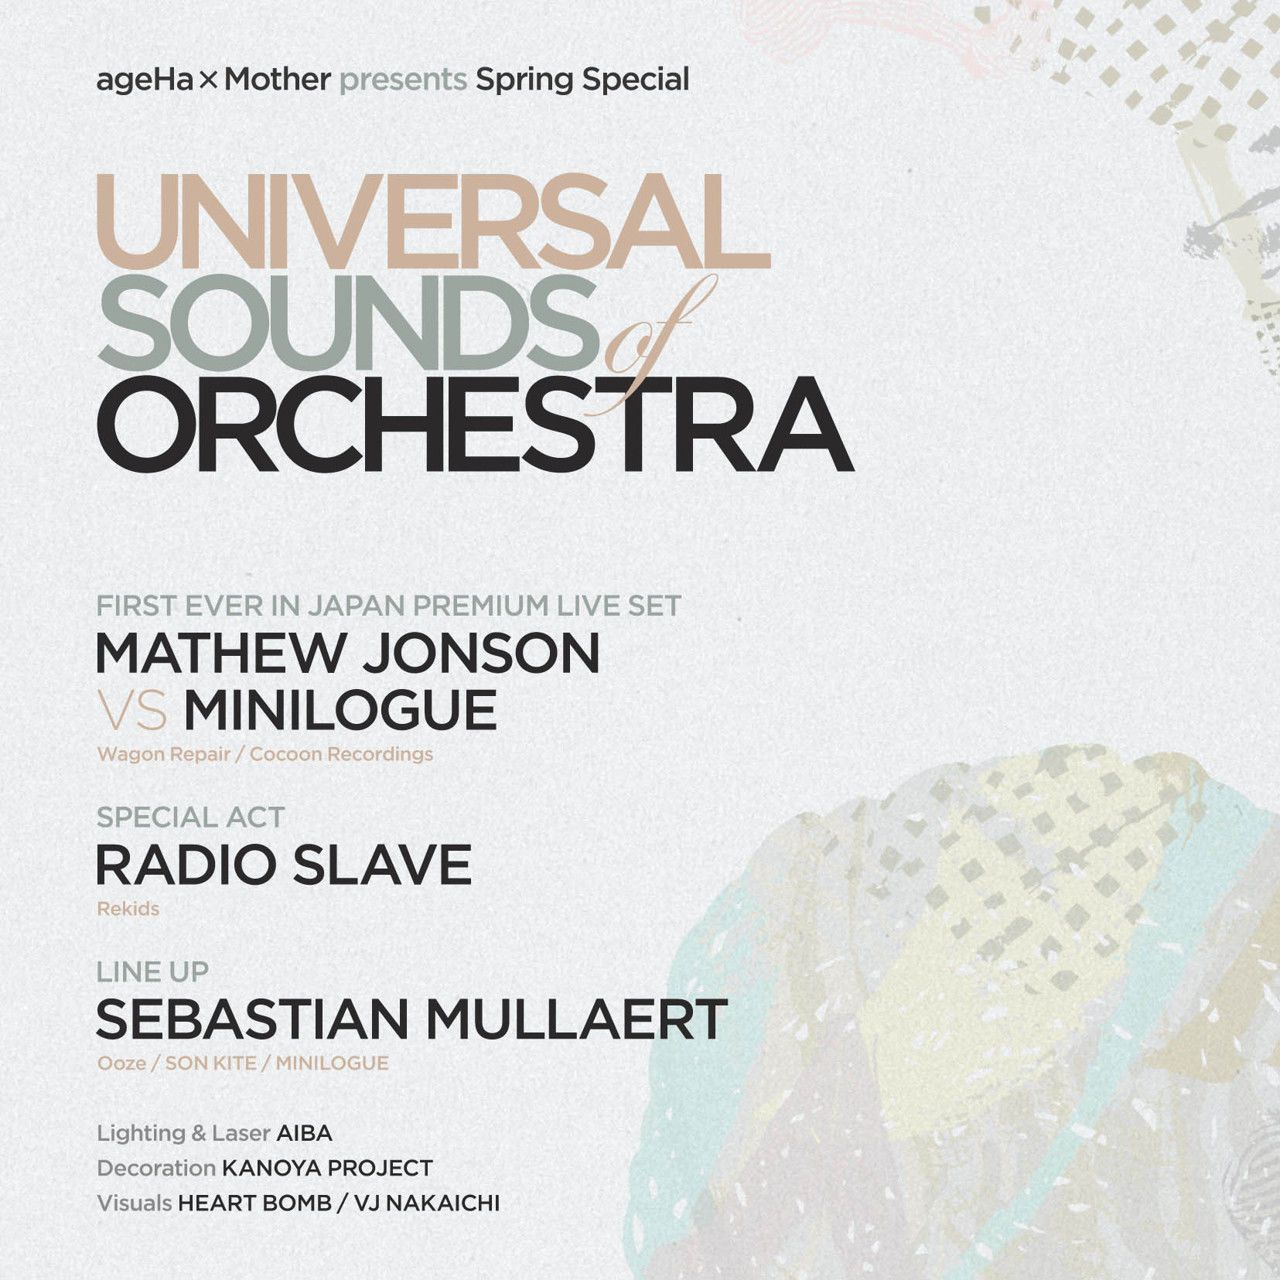 UNIVERSAL SOUNDS OF ORCHESTRA